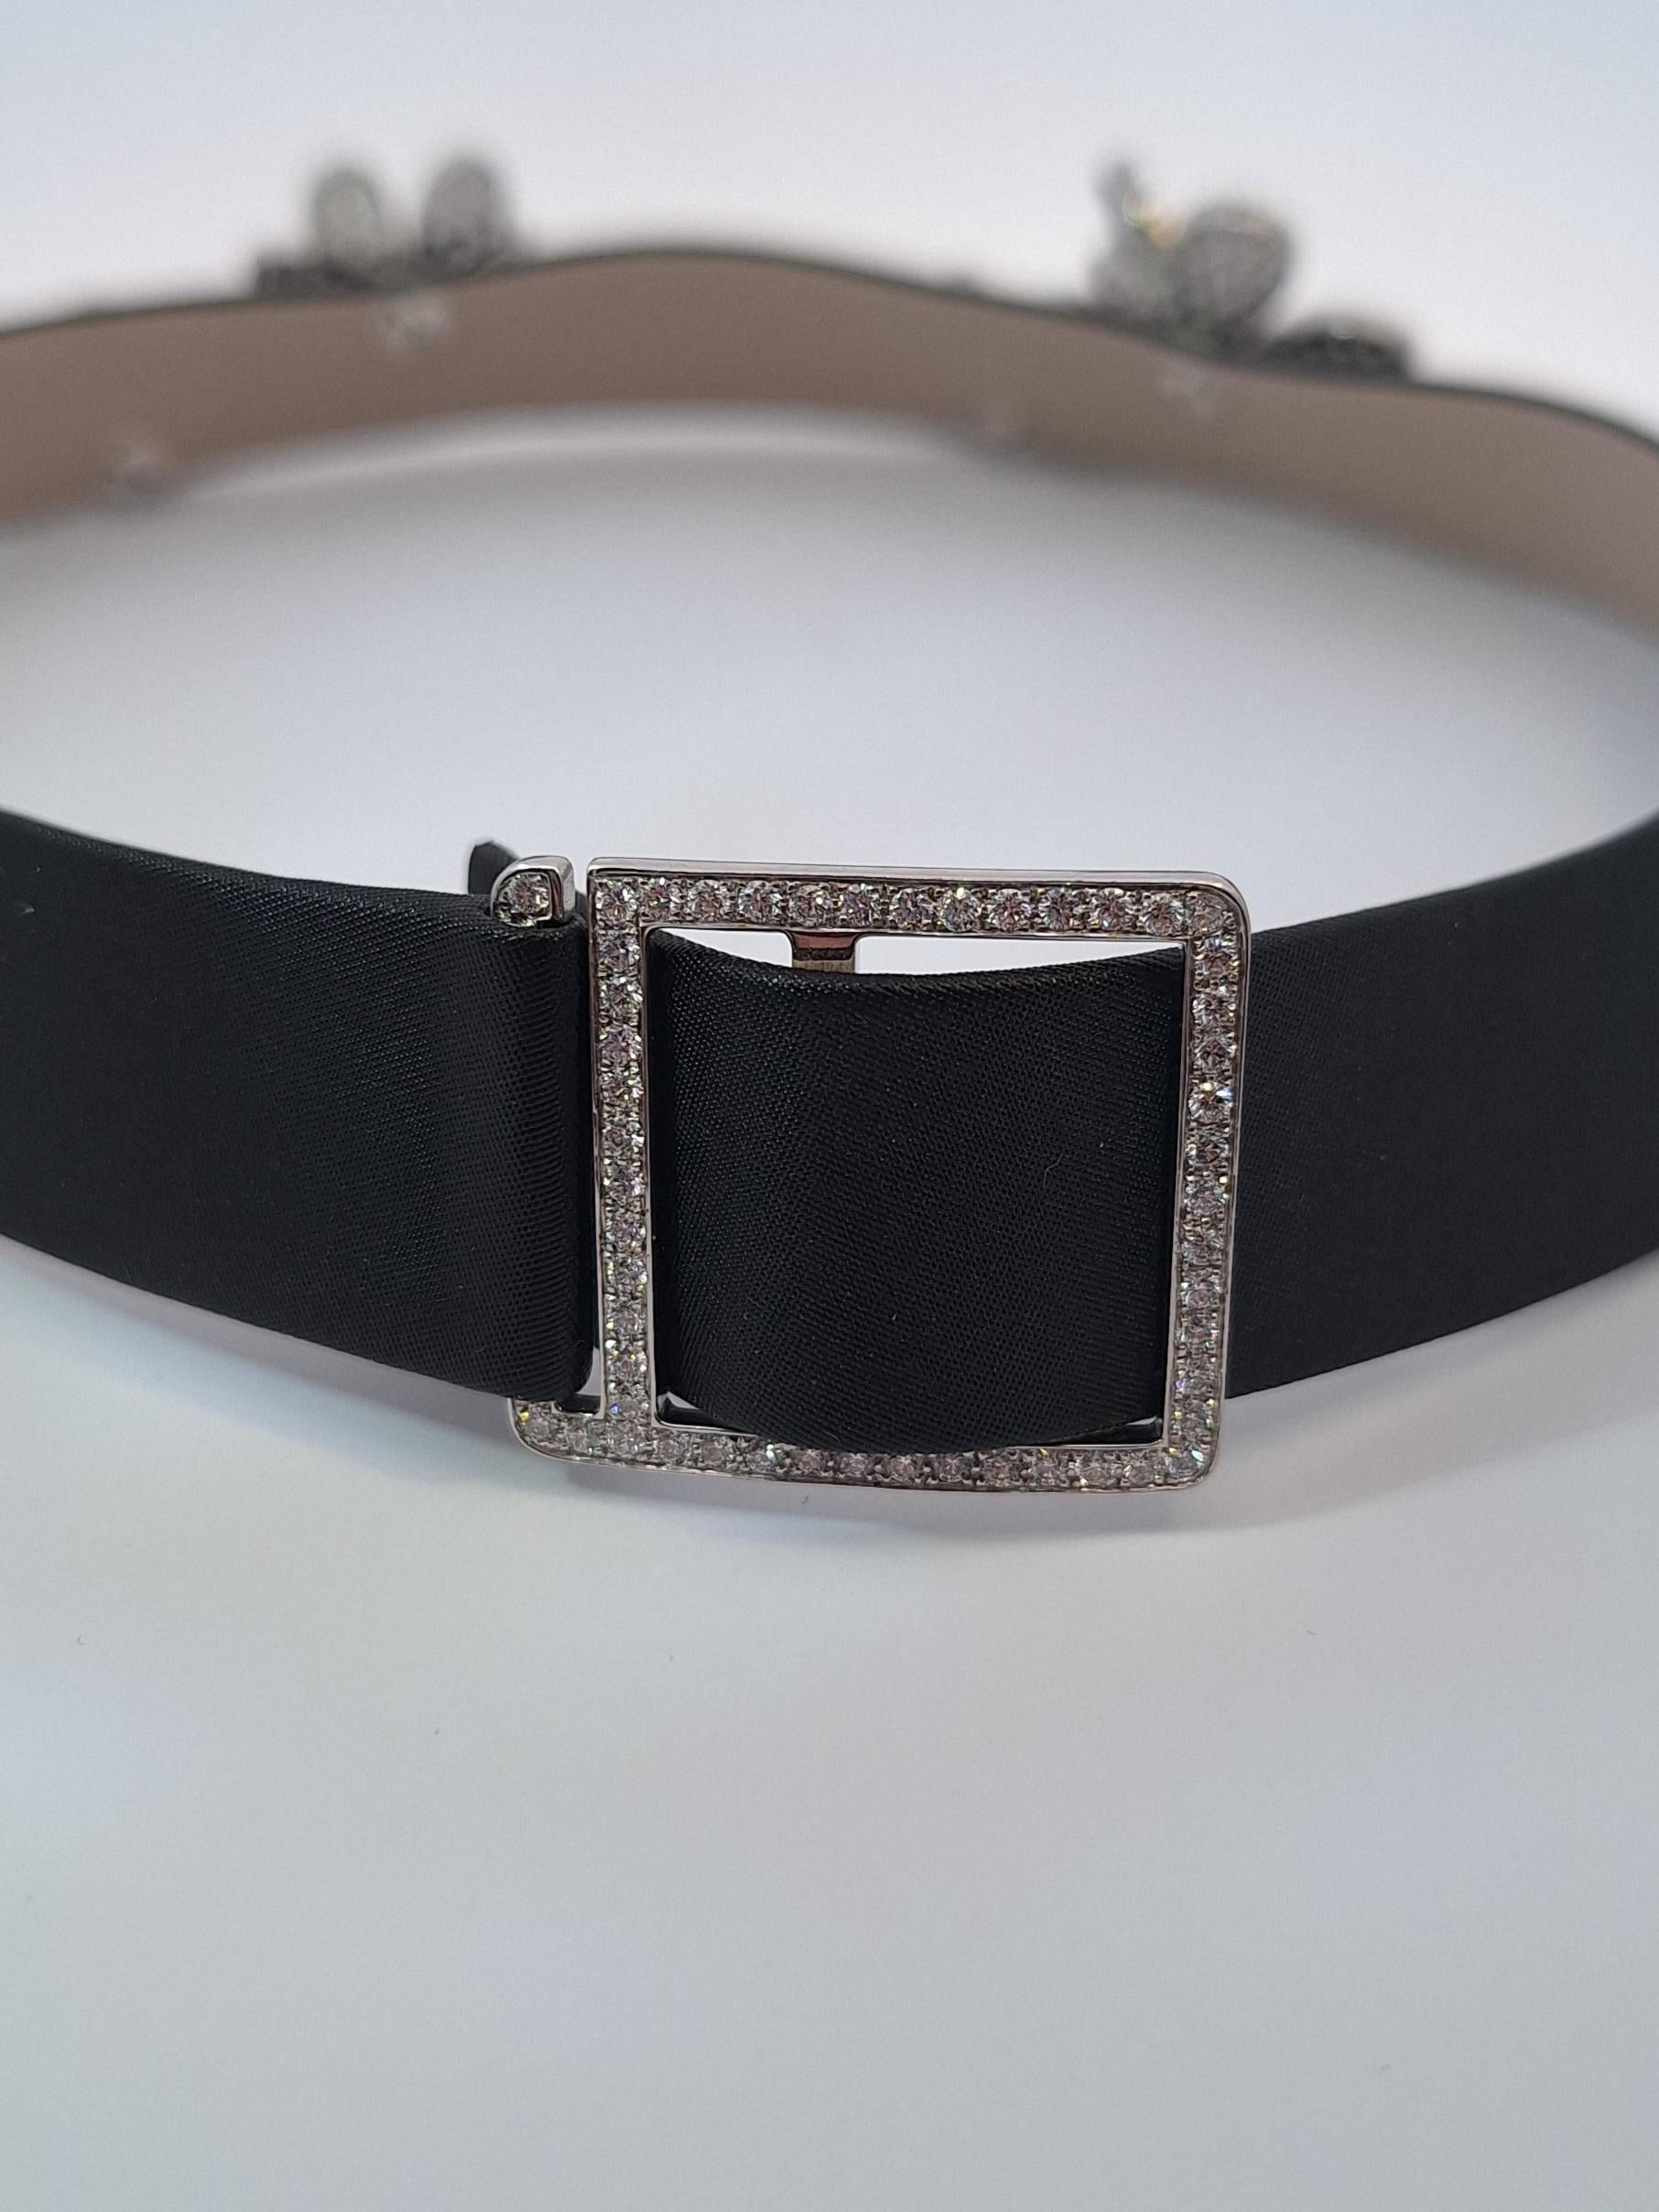 Van Cleef & Arpels Frivole Diamond Choker Necklace and Bracelet Set In Excellent Condition For Sale In New York, NY